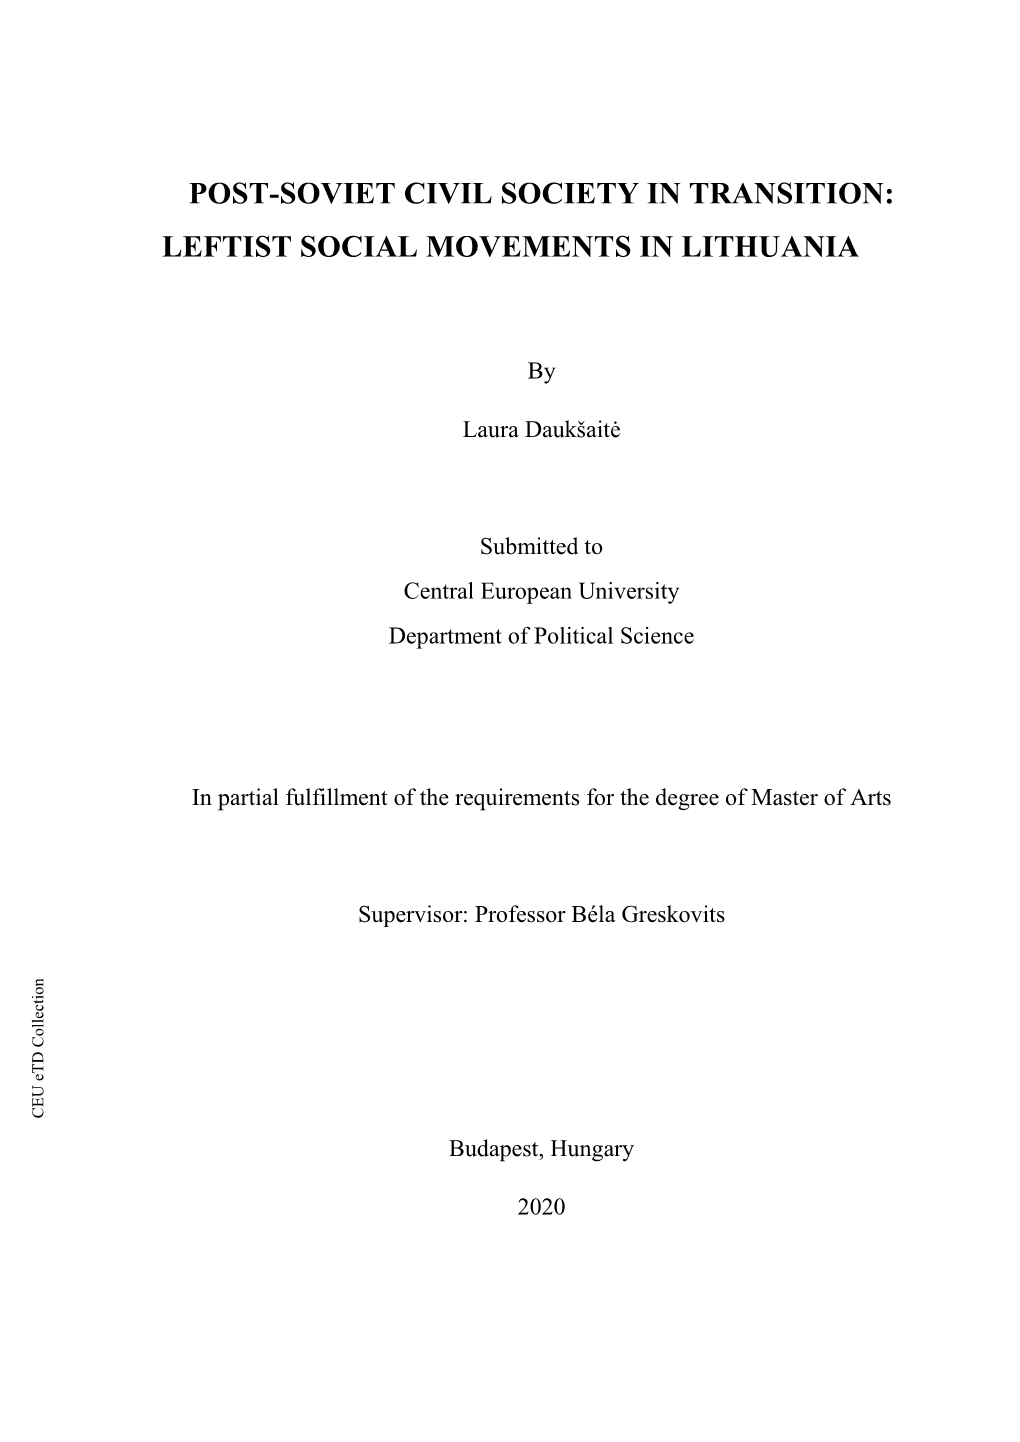 Post-Soviet Civil Society in Transition: Leftist Social Movements in Lithuania